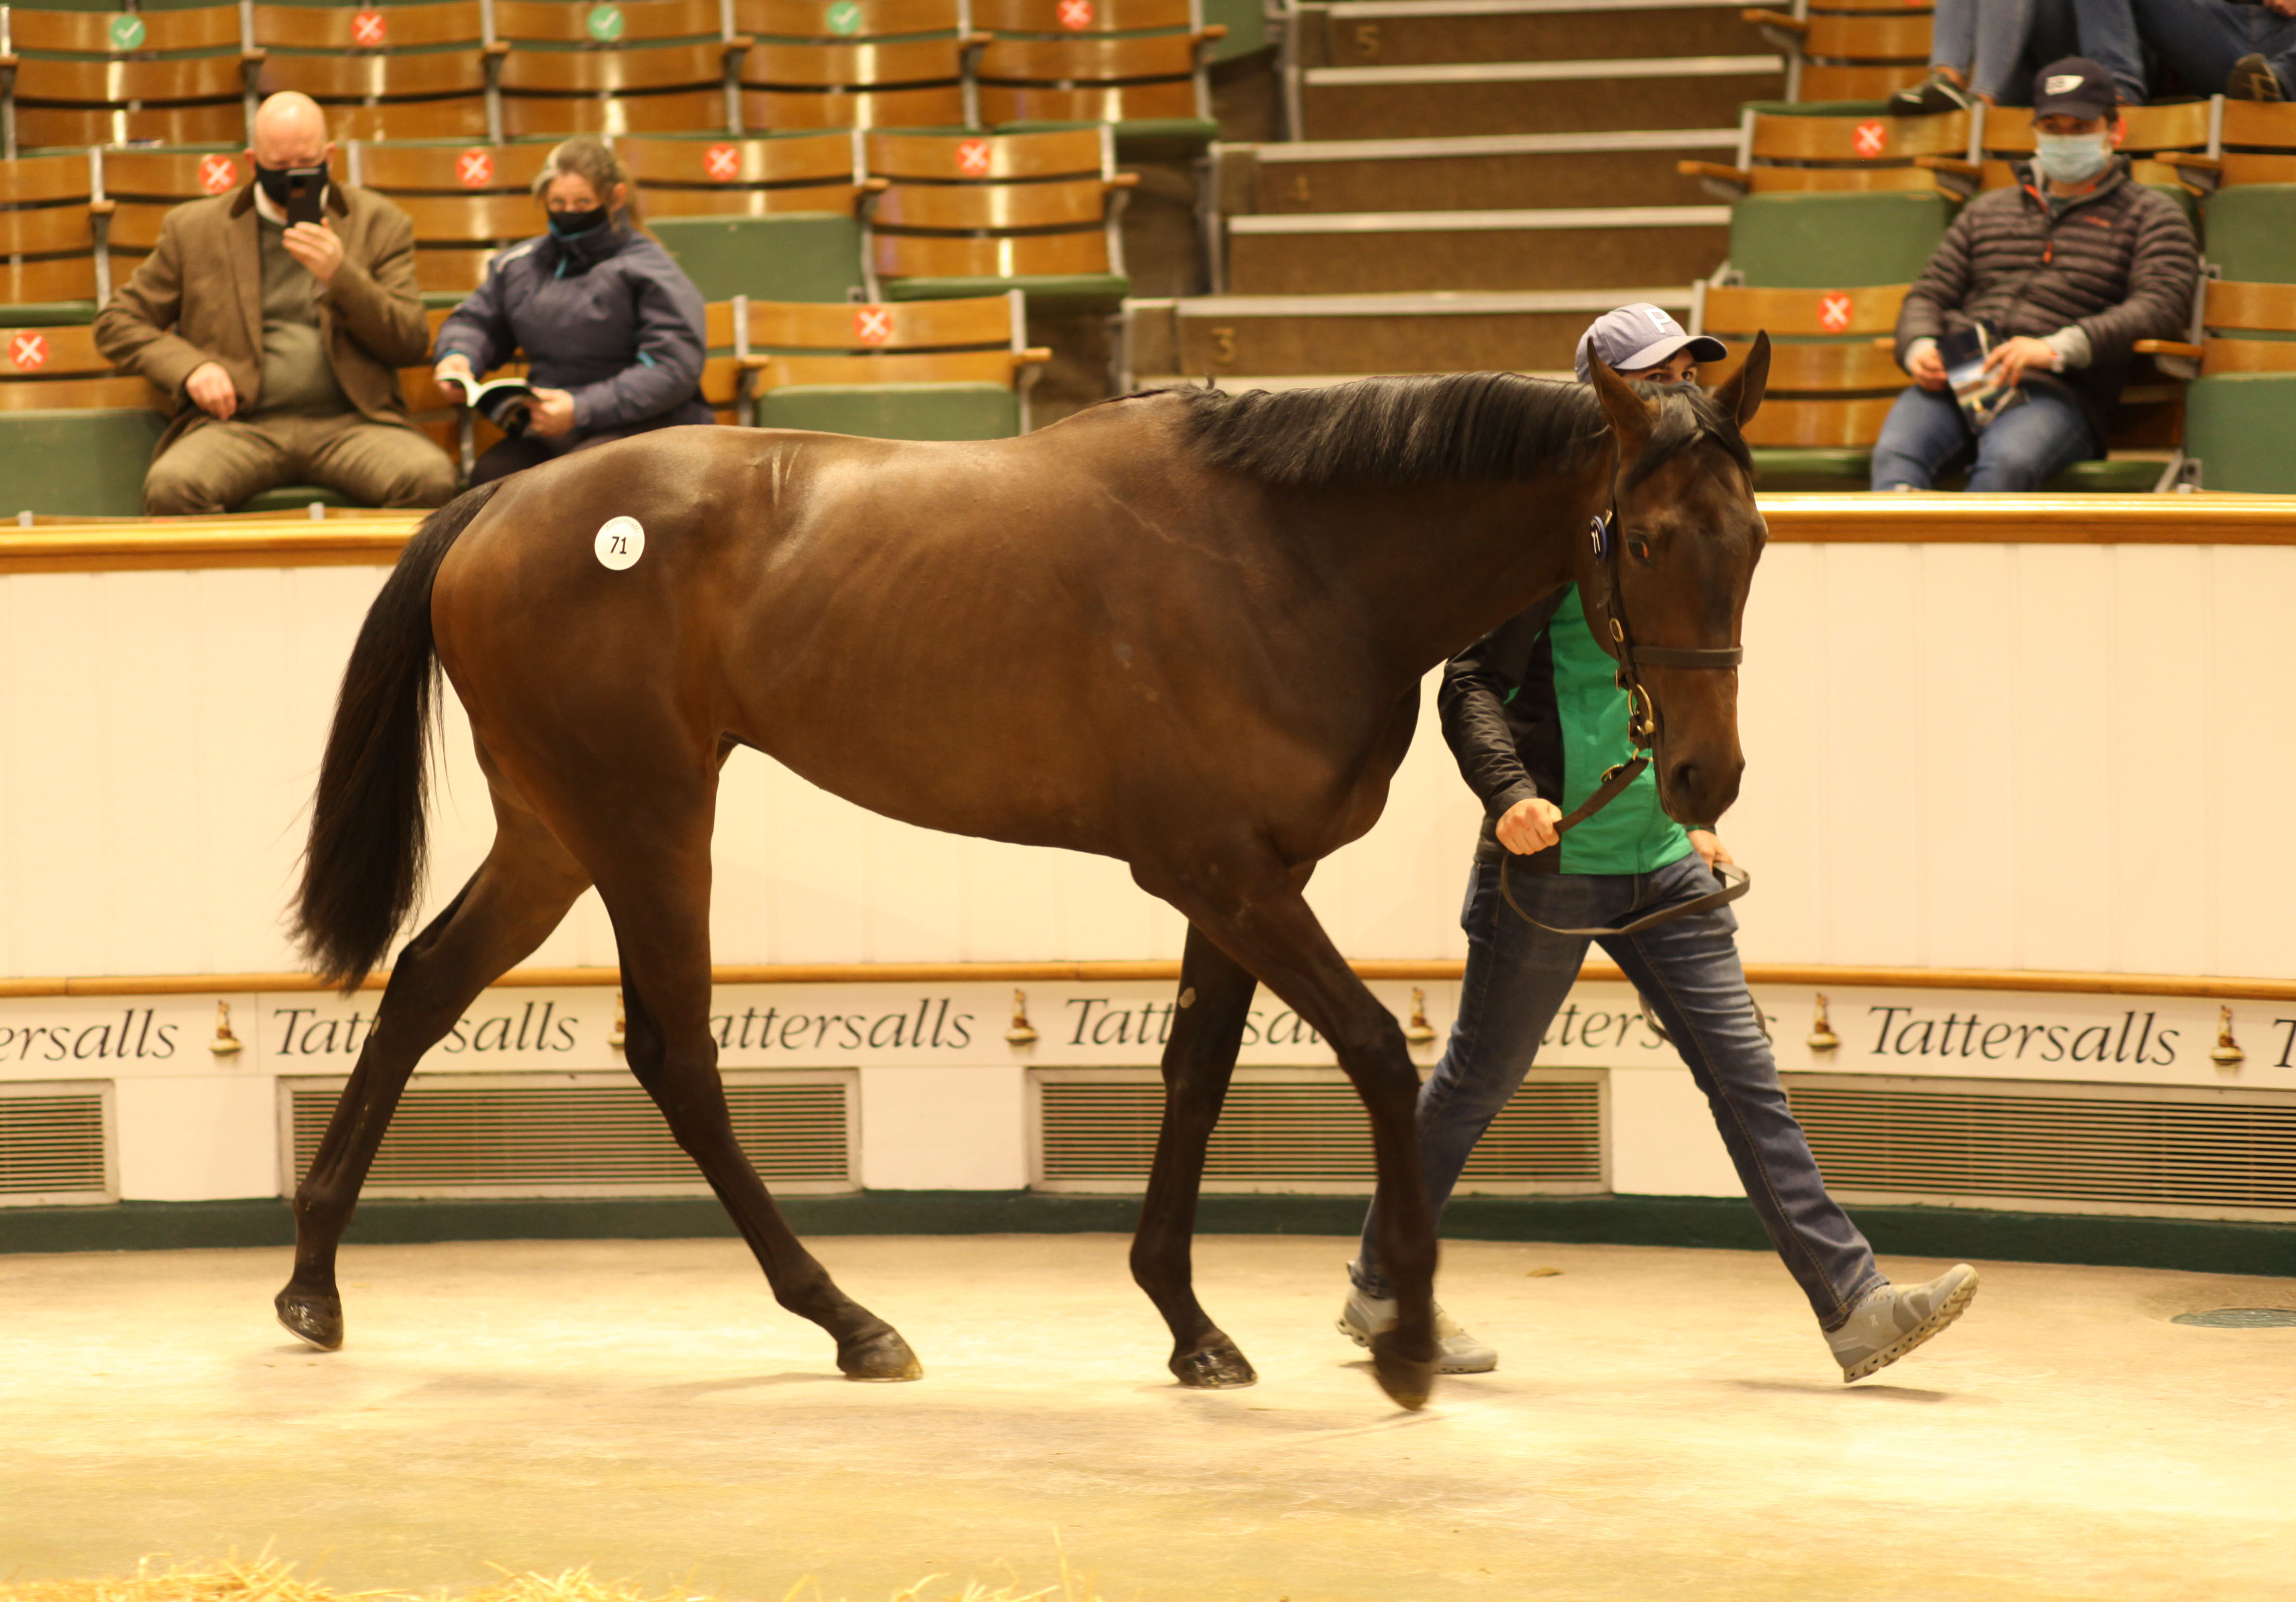 Lot 71 Practical Joke - Purr And Powl filly. Picture: Tattersalls.